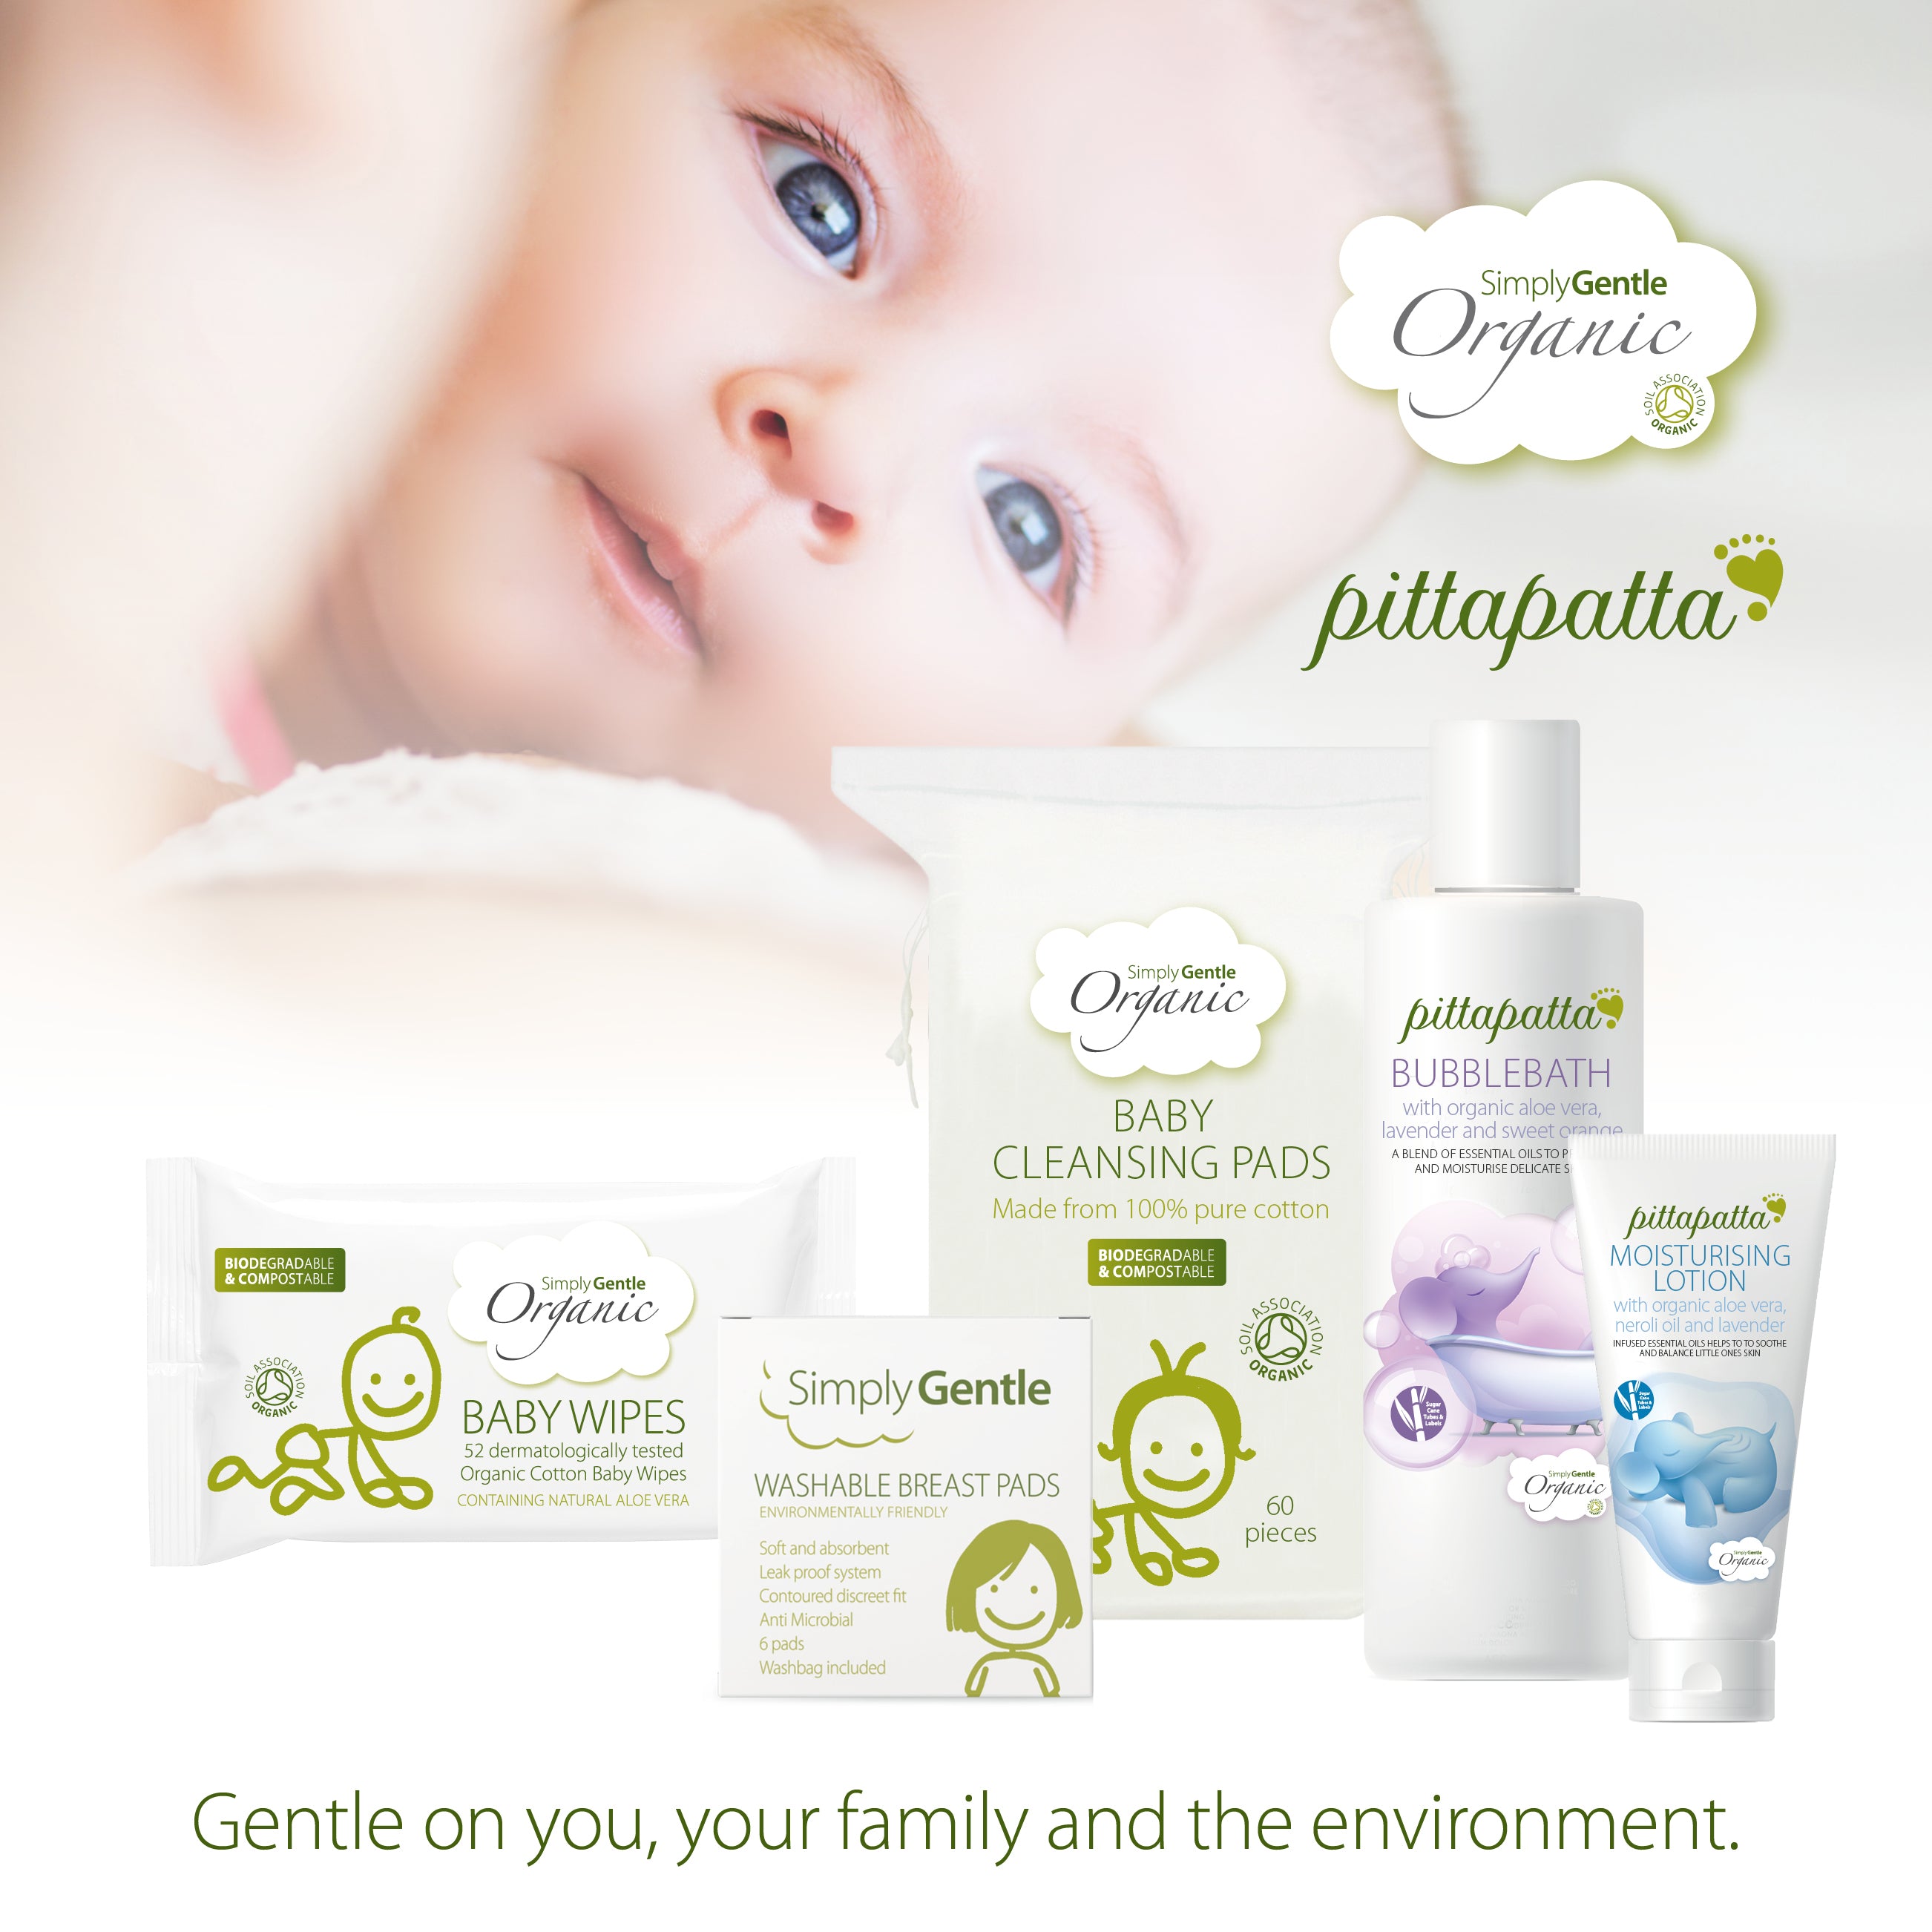 The Simply Gentle Organic Mother & Baby skincare range has been developed for maximum comfort and protection for both mothers and infants. Using a combination of natural and organic ingredients, using Simply Gentle’s products means that you are doing more than just looking after yourself and your baby, you are also looking after the environment in which you both grow.